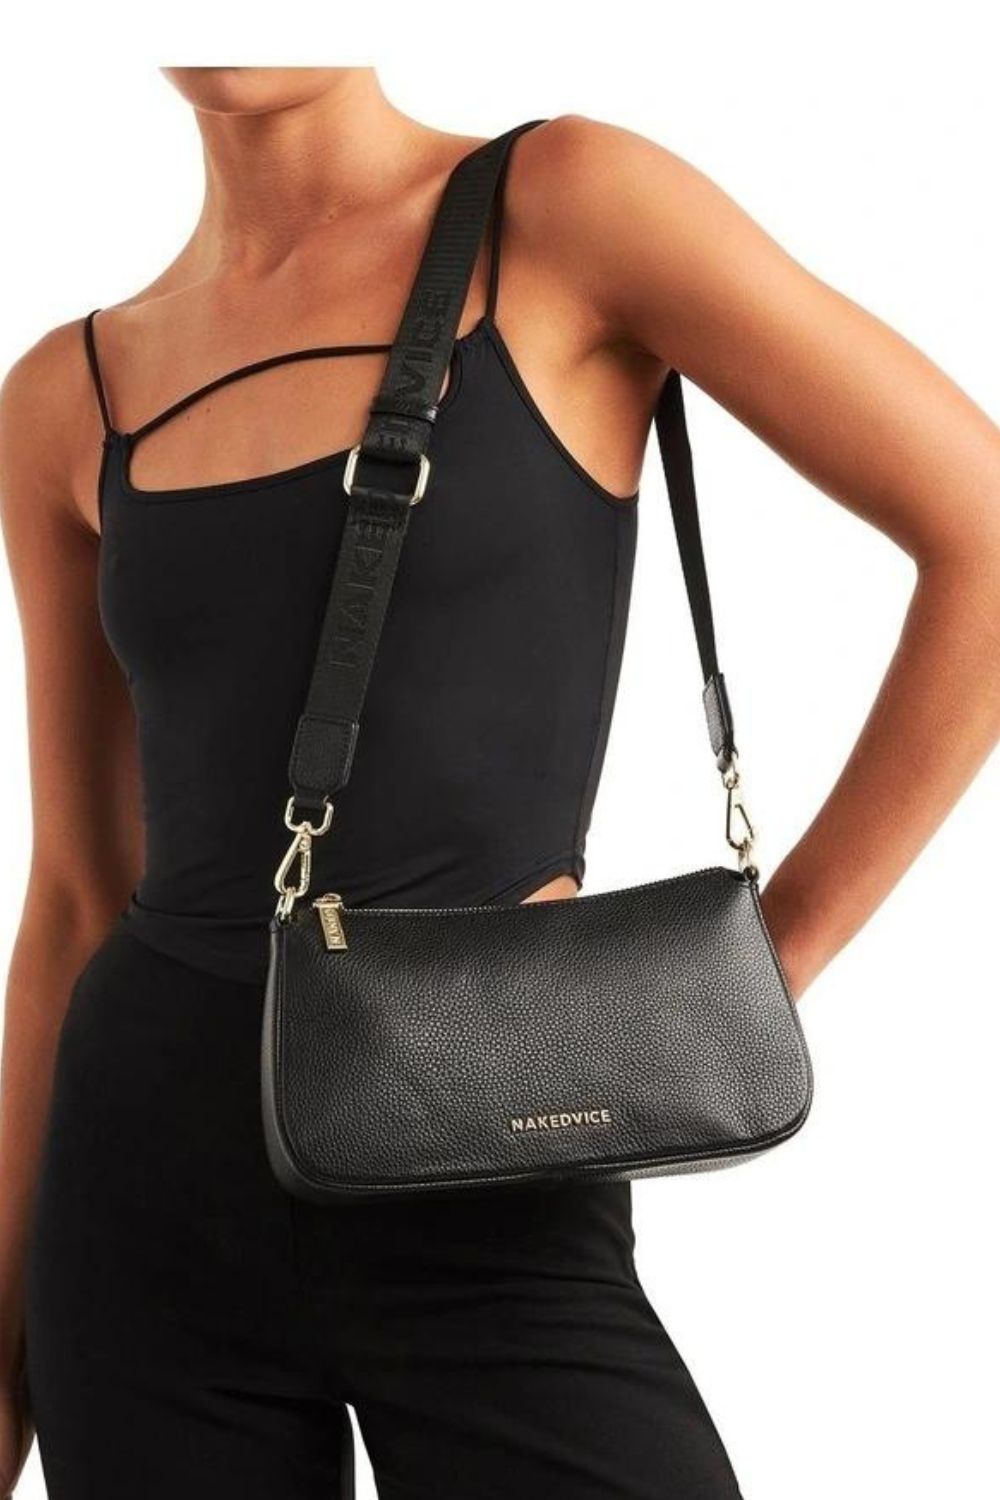 Nakedvice | The Bobby Bag | Black Leather with Gold